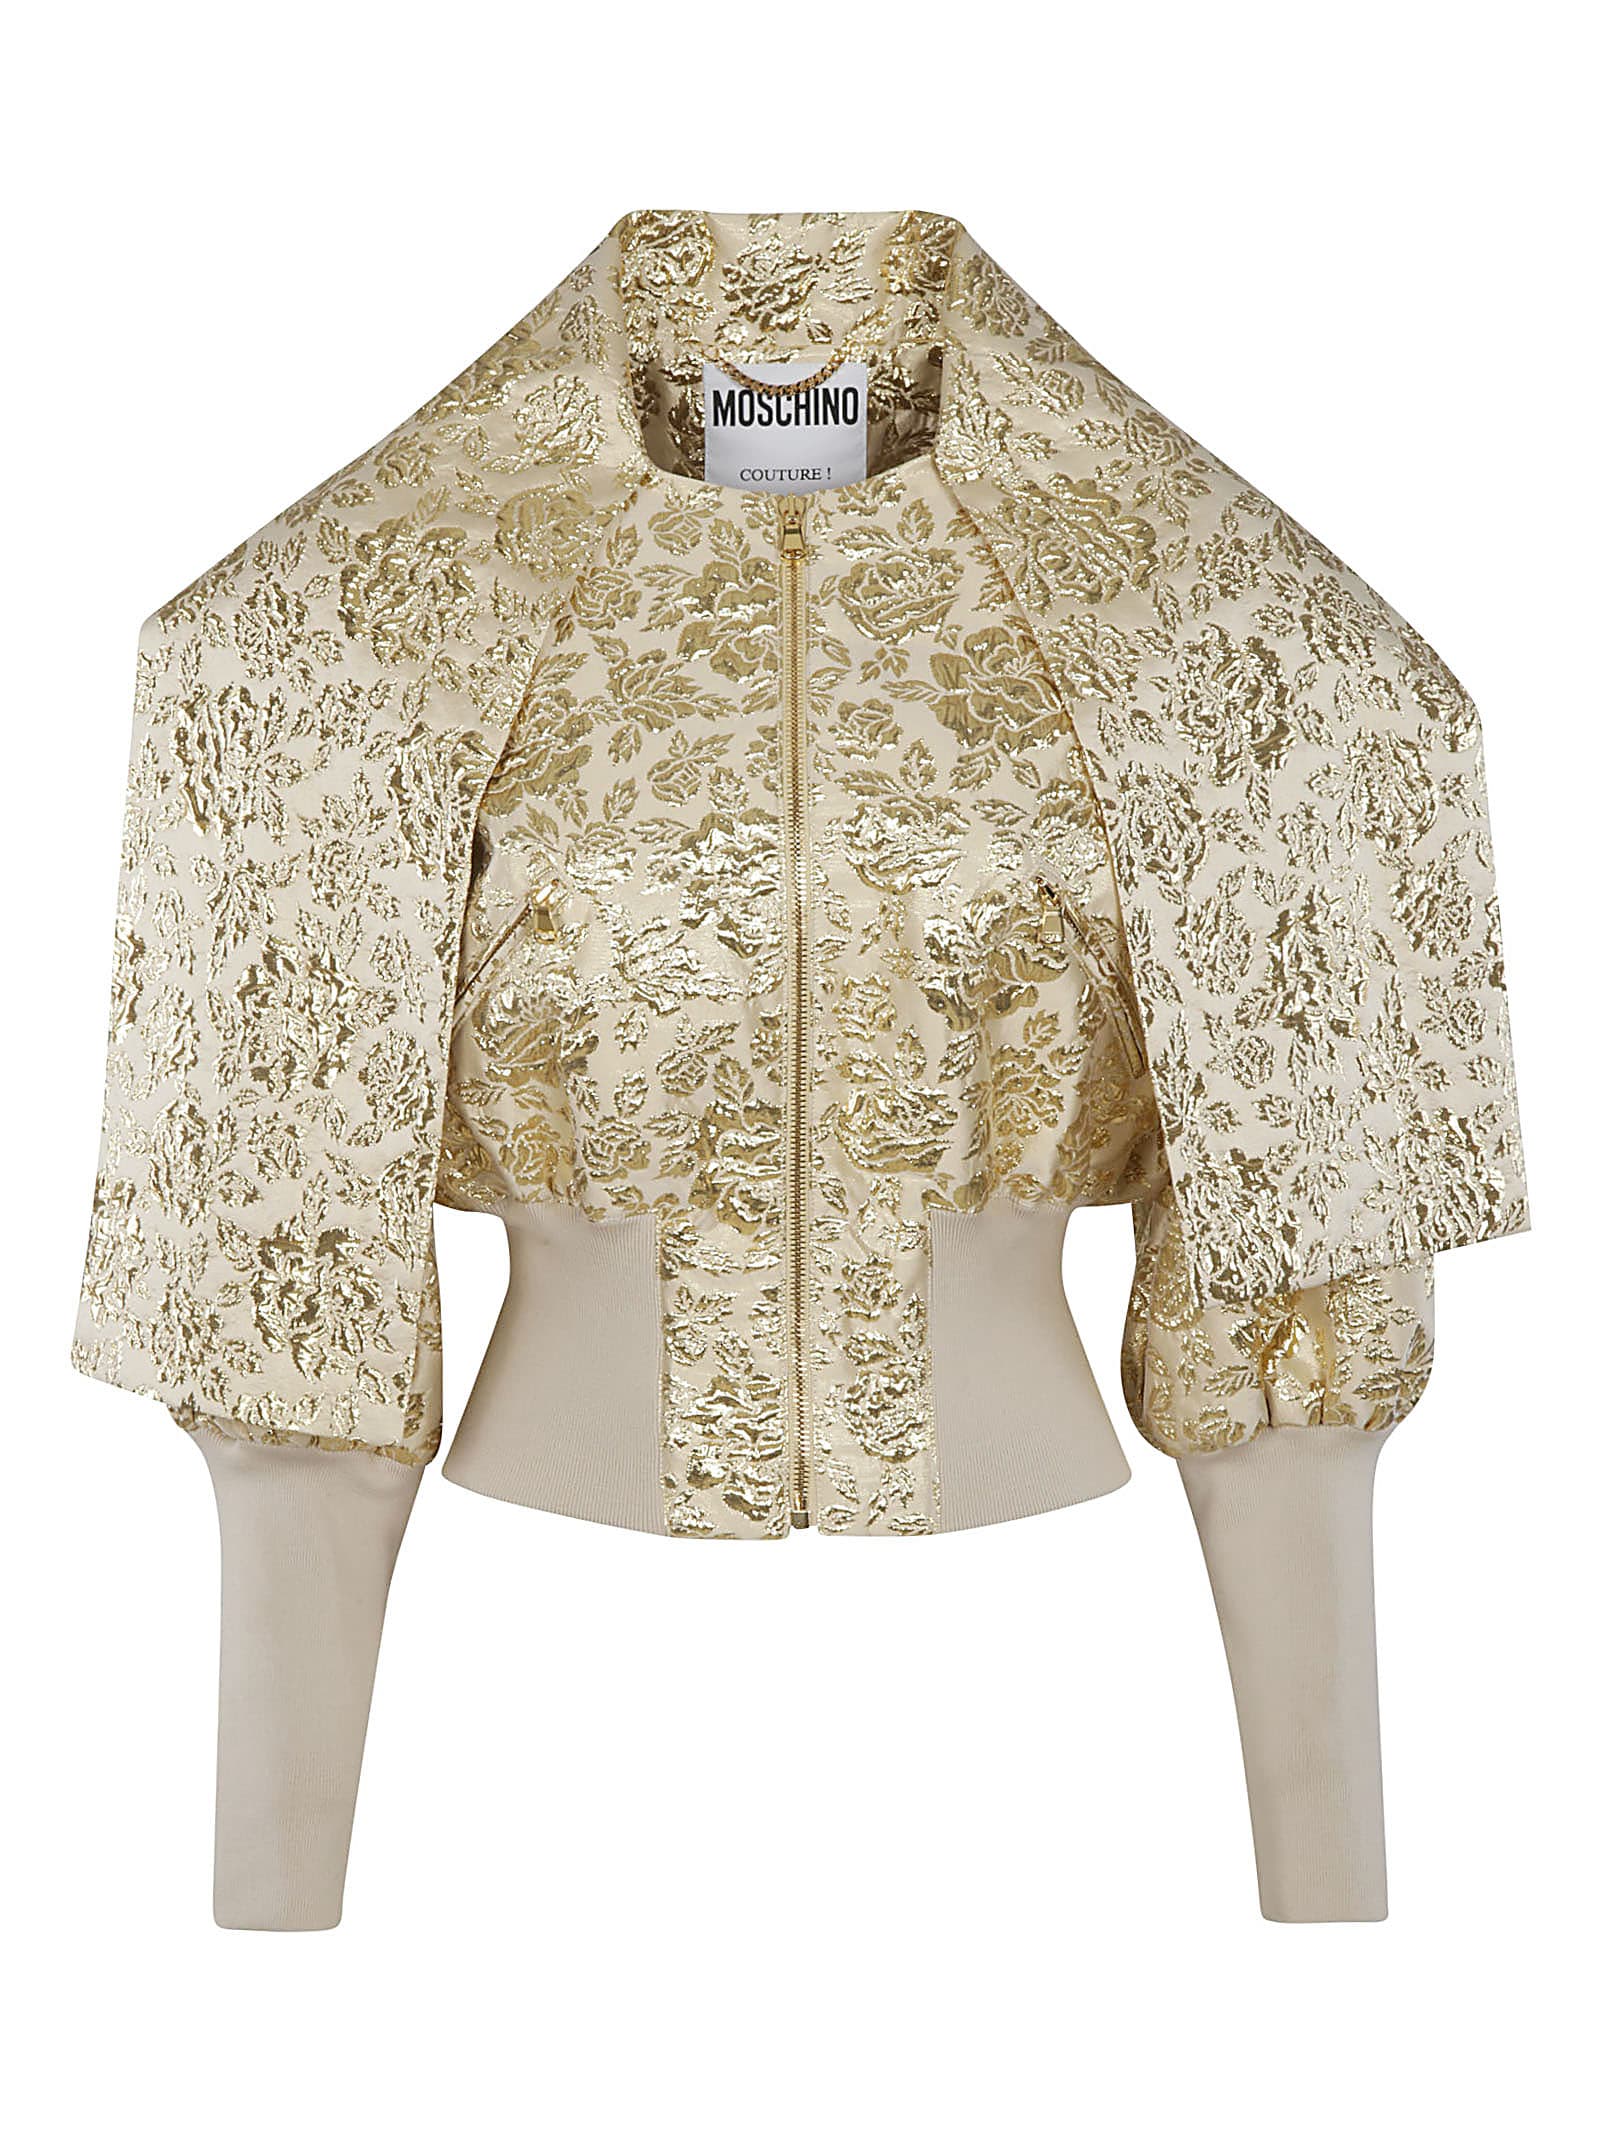 Moschino Floral Embroidered Zip Top